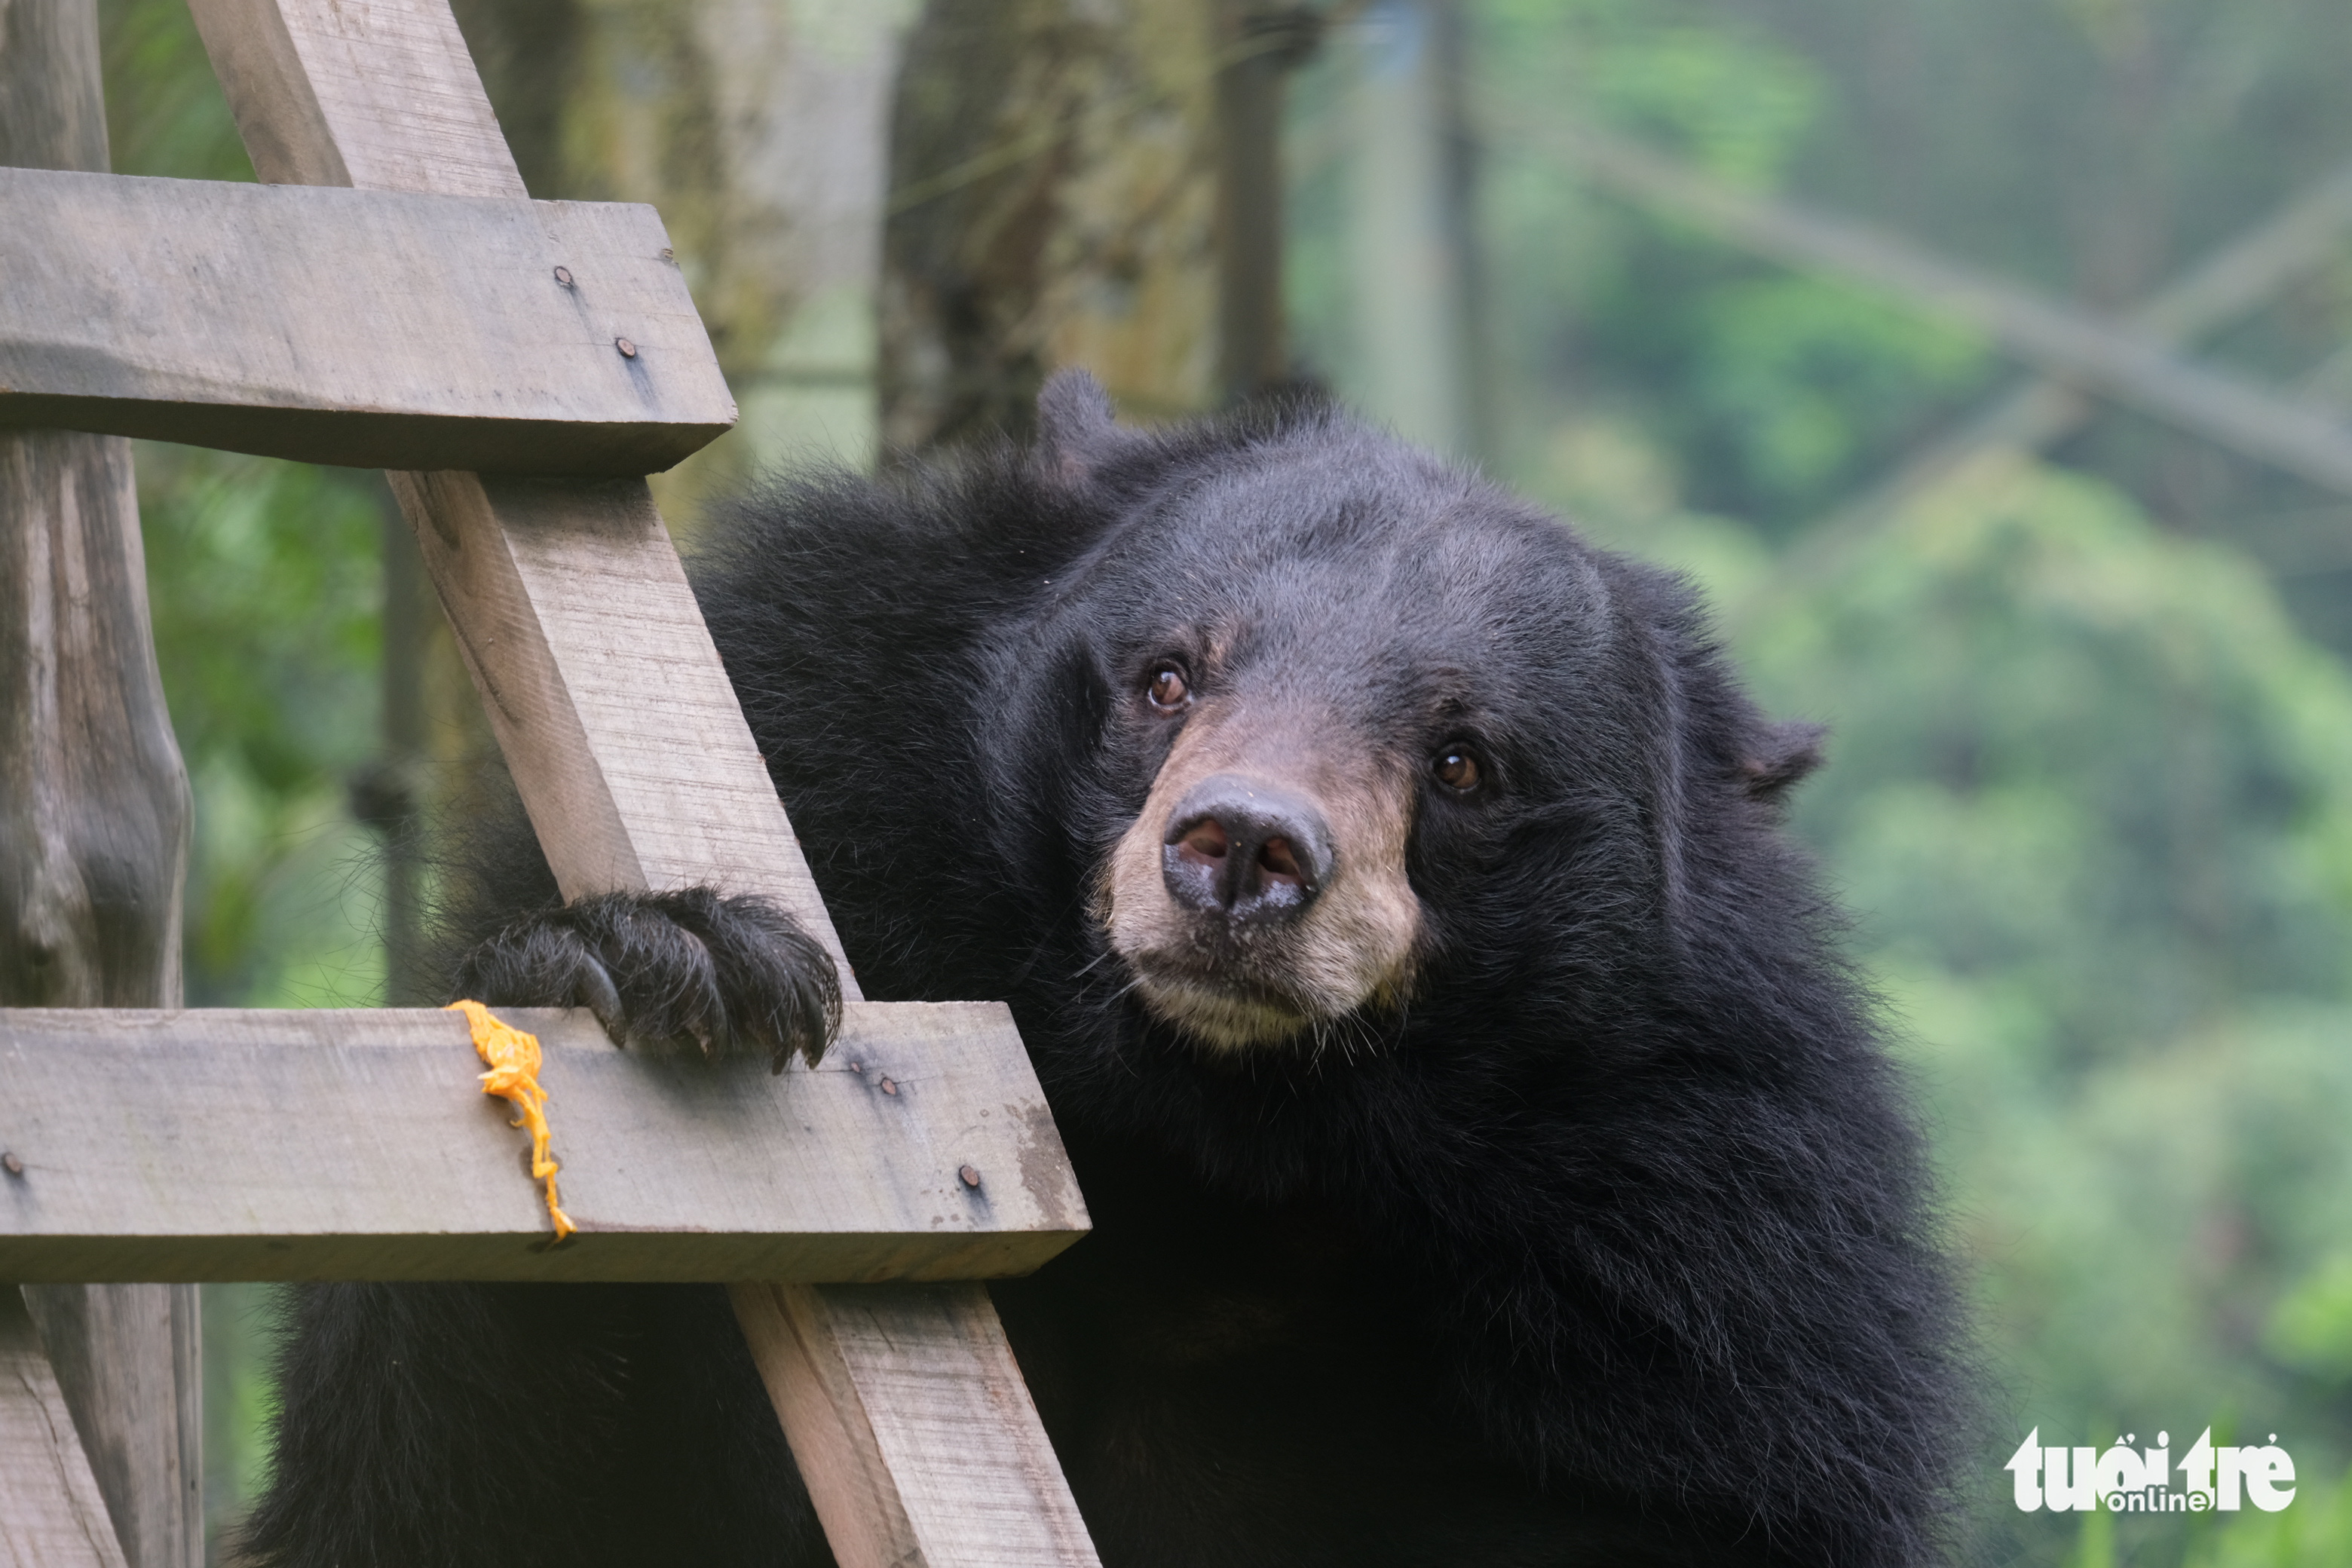 Int’l, Vietnamese stars join hands for bear protection campaign